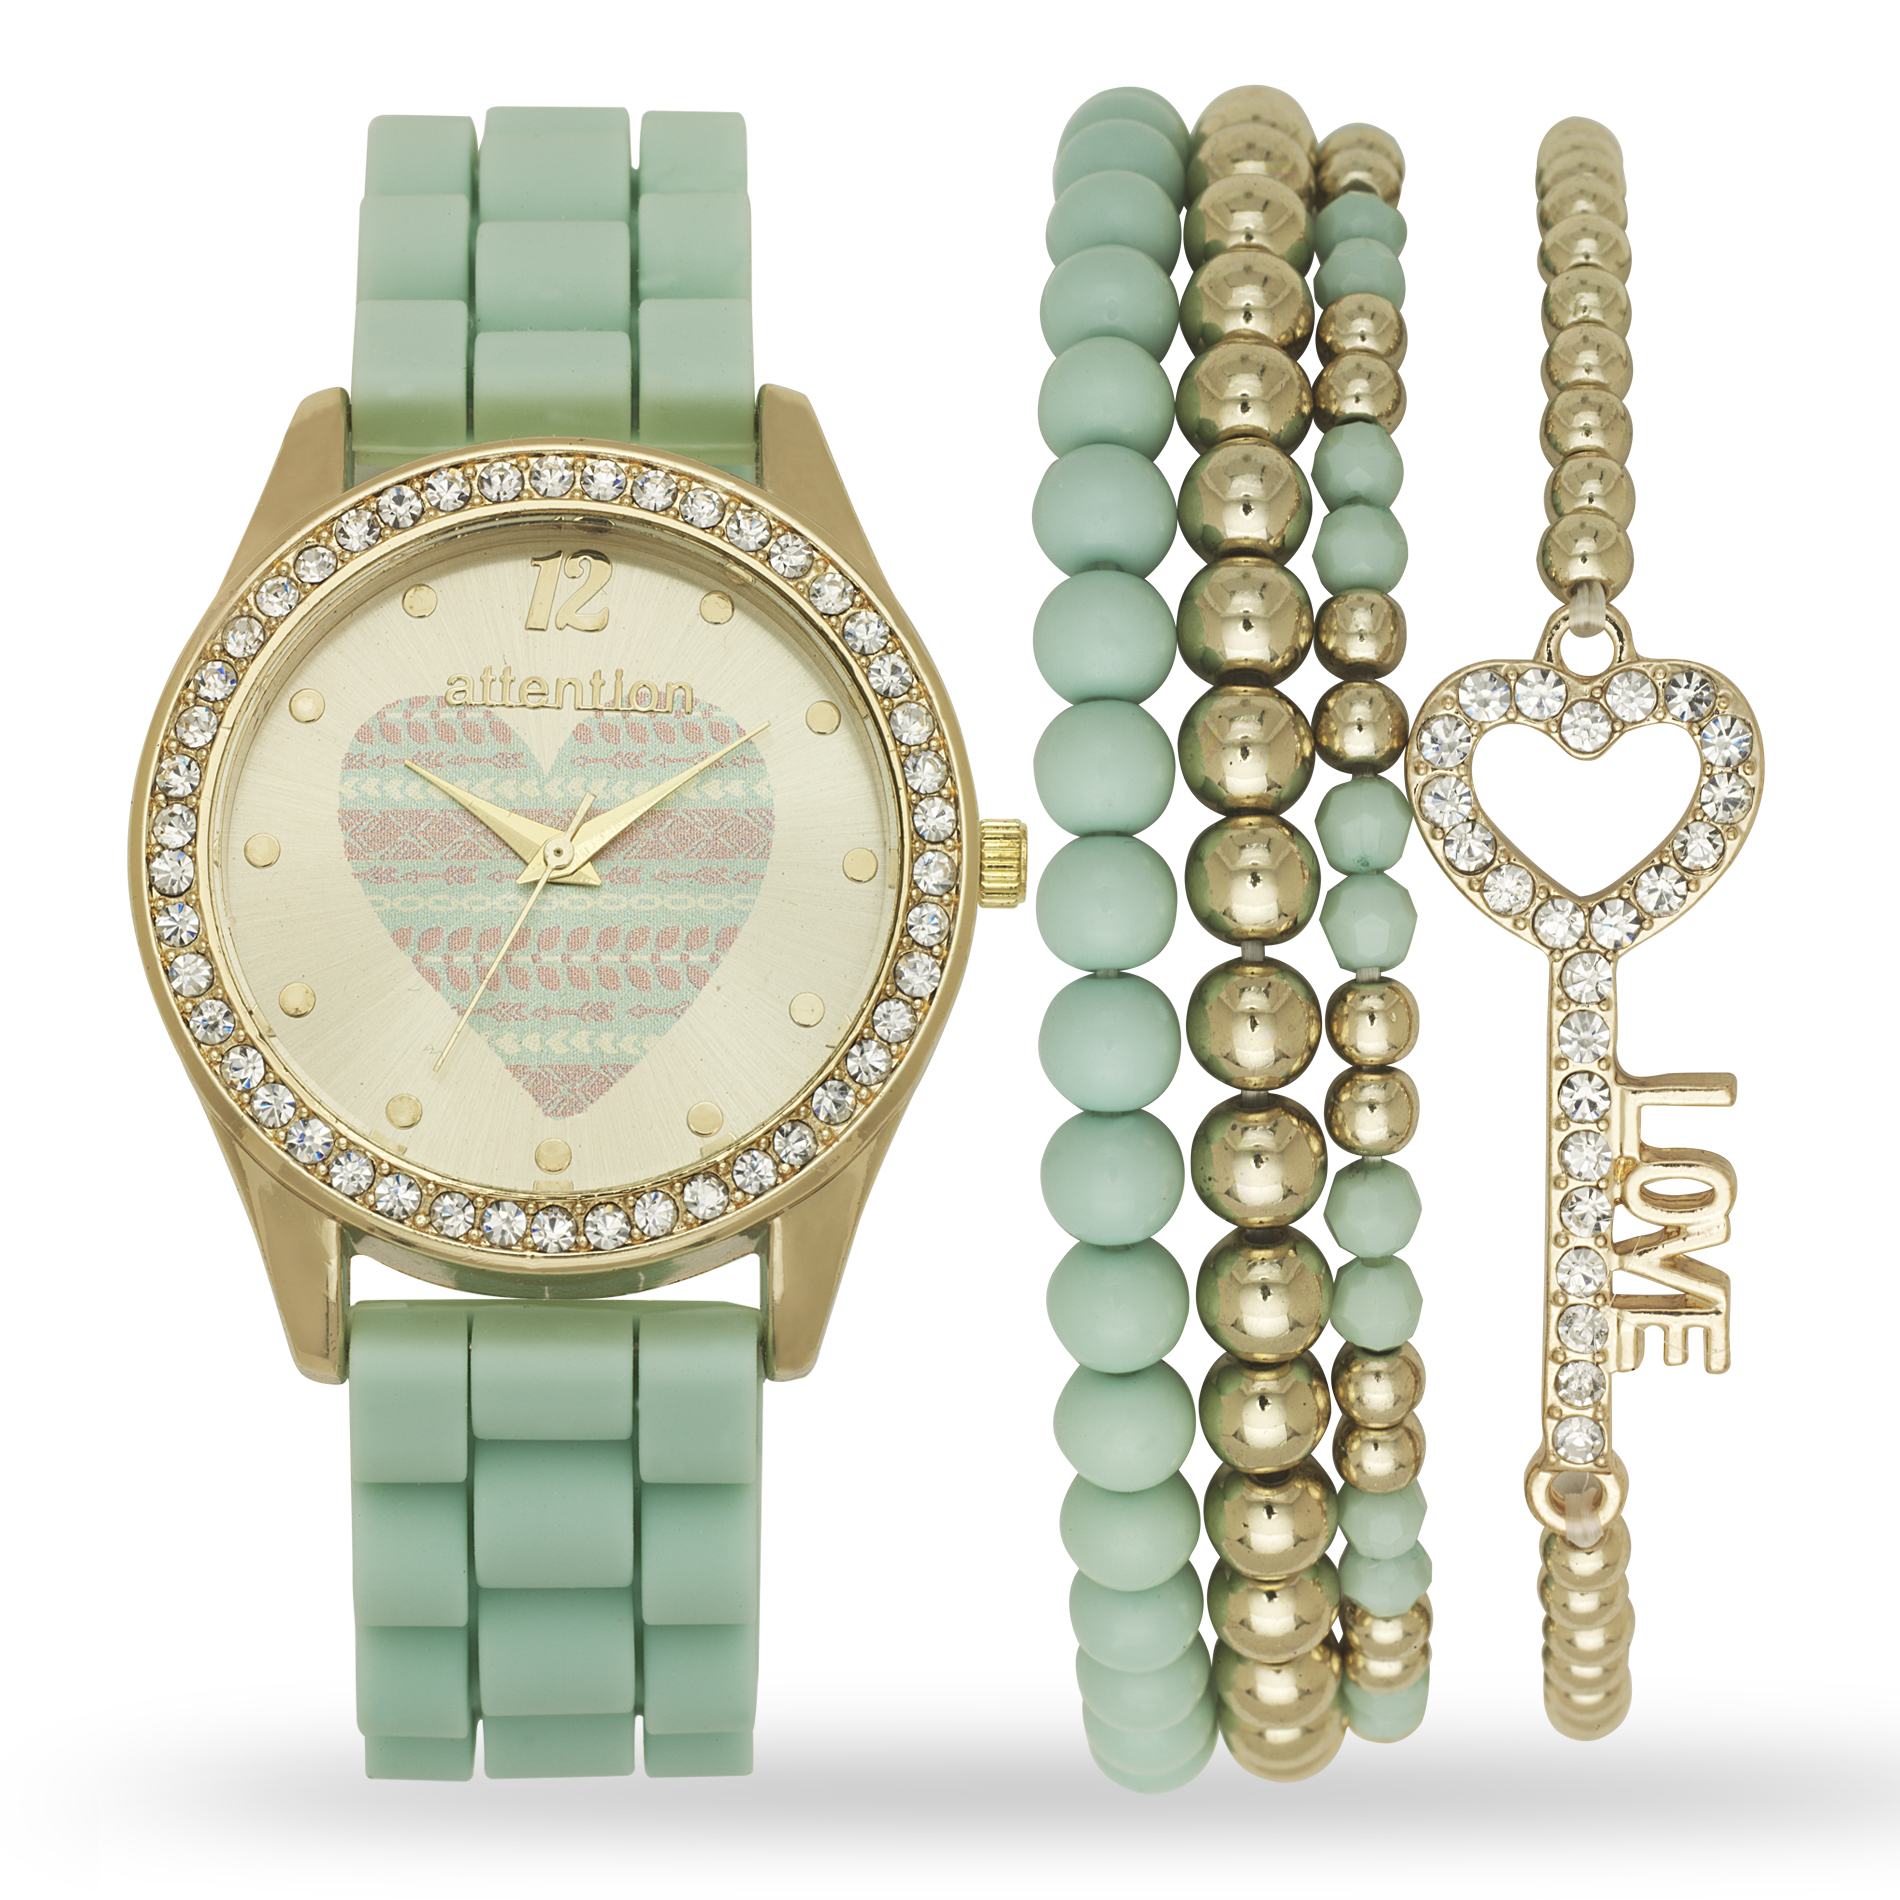 Attention Ladies Gold and Mint Watch and Bracelet Set